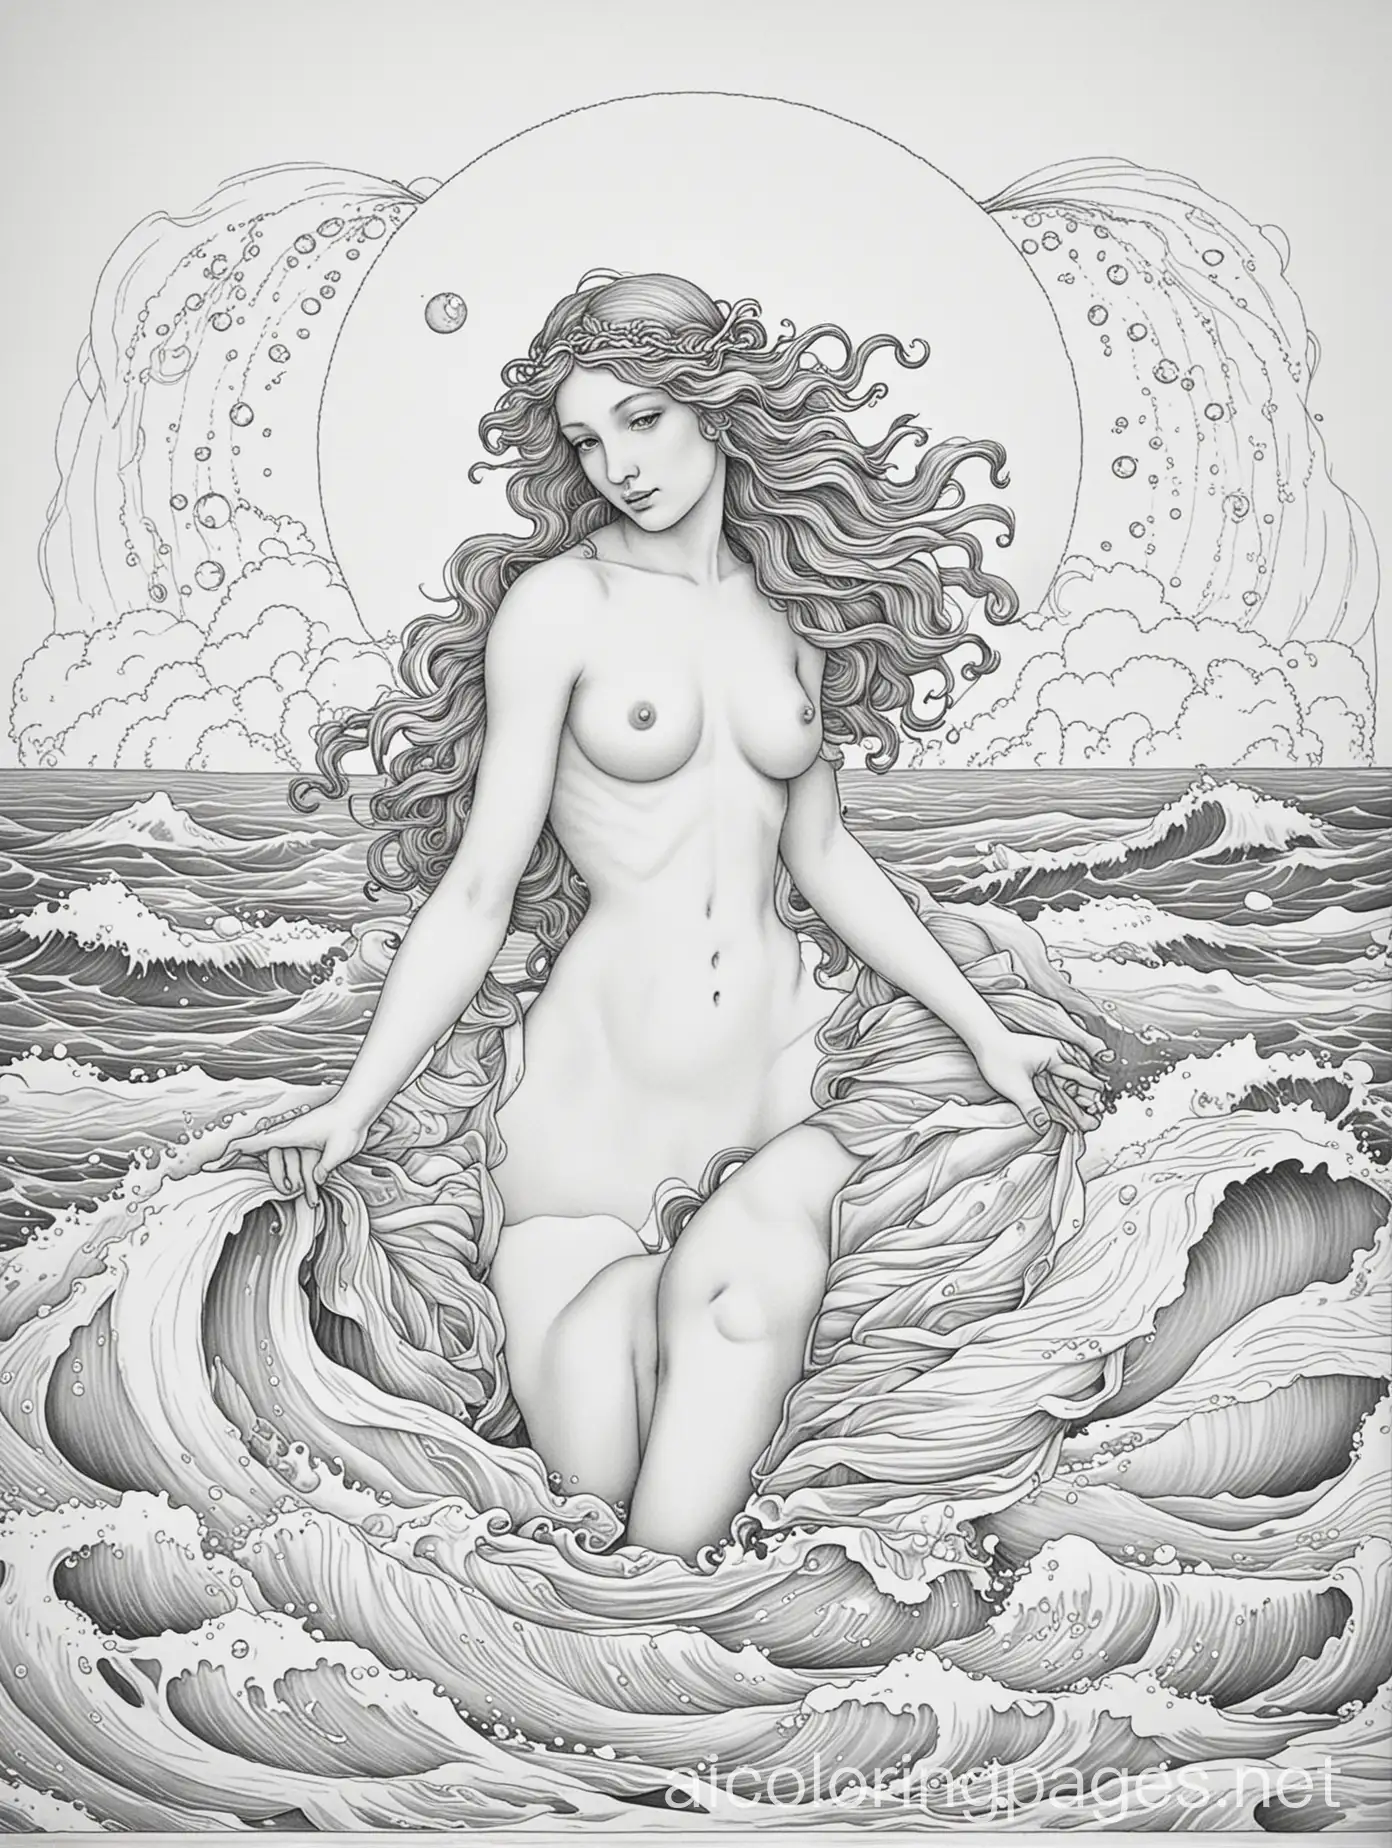 a greek myth coloring page for adults, image depicting: **The Birth of Venus** - An illustration inspired by Botticelli's painting, showing Venus standing on a clamshell, emerging from the sea, surrounded by waves and sea foam. Classical illustration style, Coloring Page, black and white, line art, white background, Simplicity, Ample White Space. The background of the coloring page is plain white to make it easy for young children to color within the lines. The outlines of all the subjects are easy to distinguish, making it simple for kids to color without too much difficulty